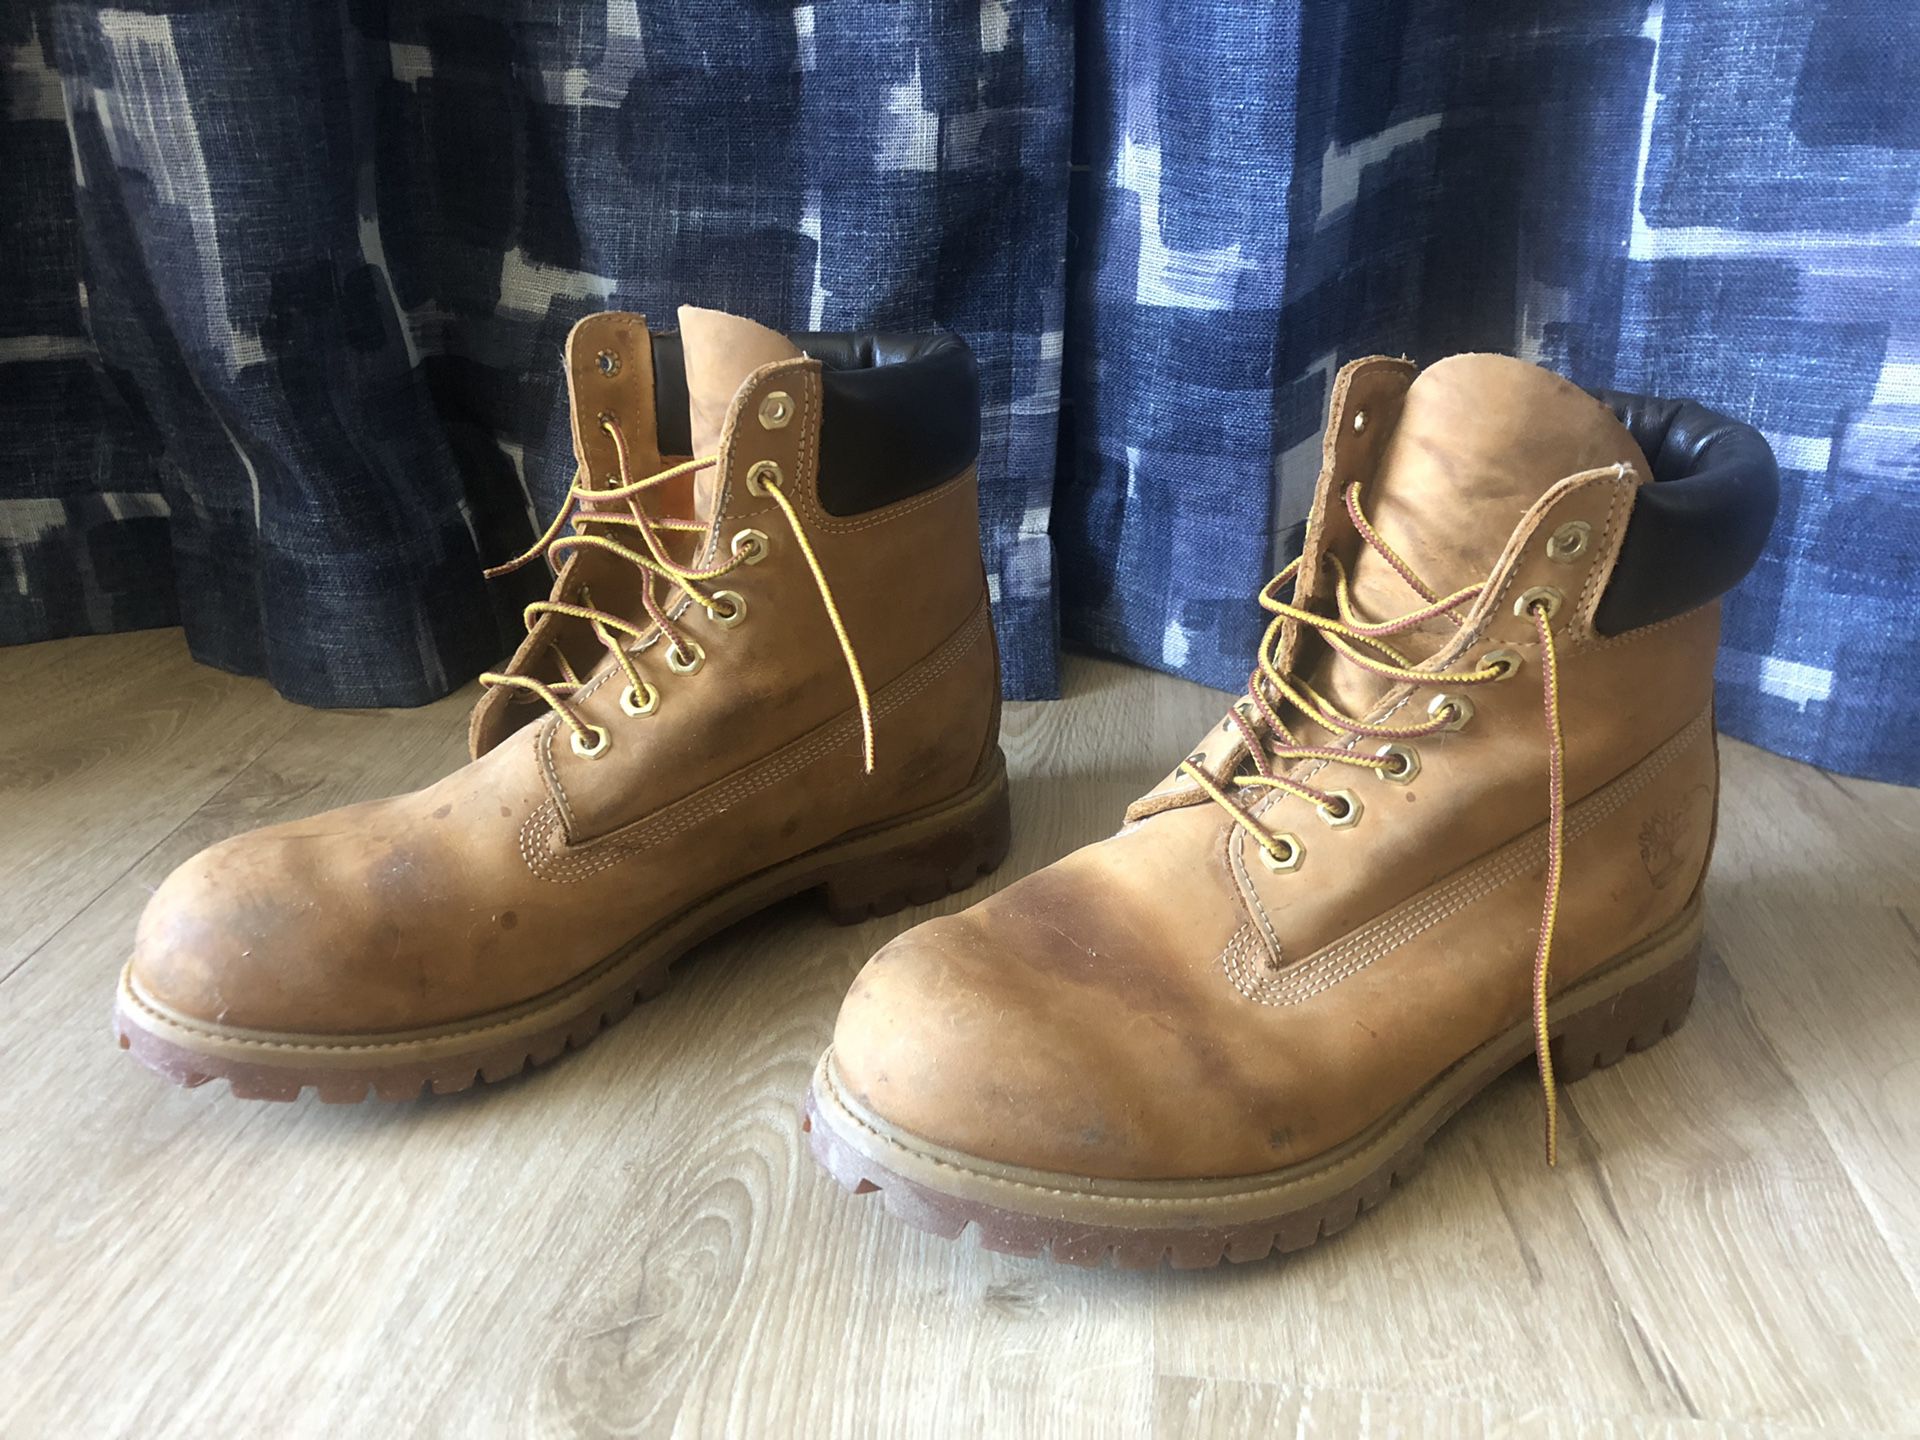 Men’s Timberland Work Boots size 10